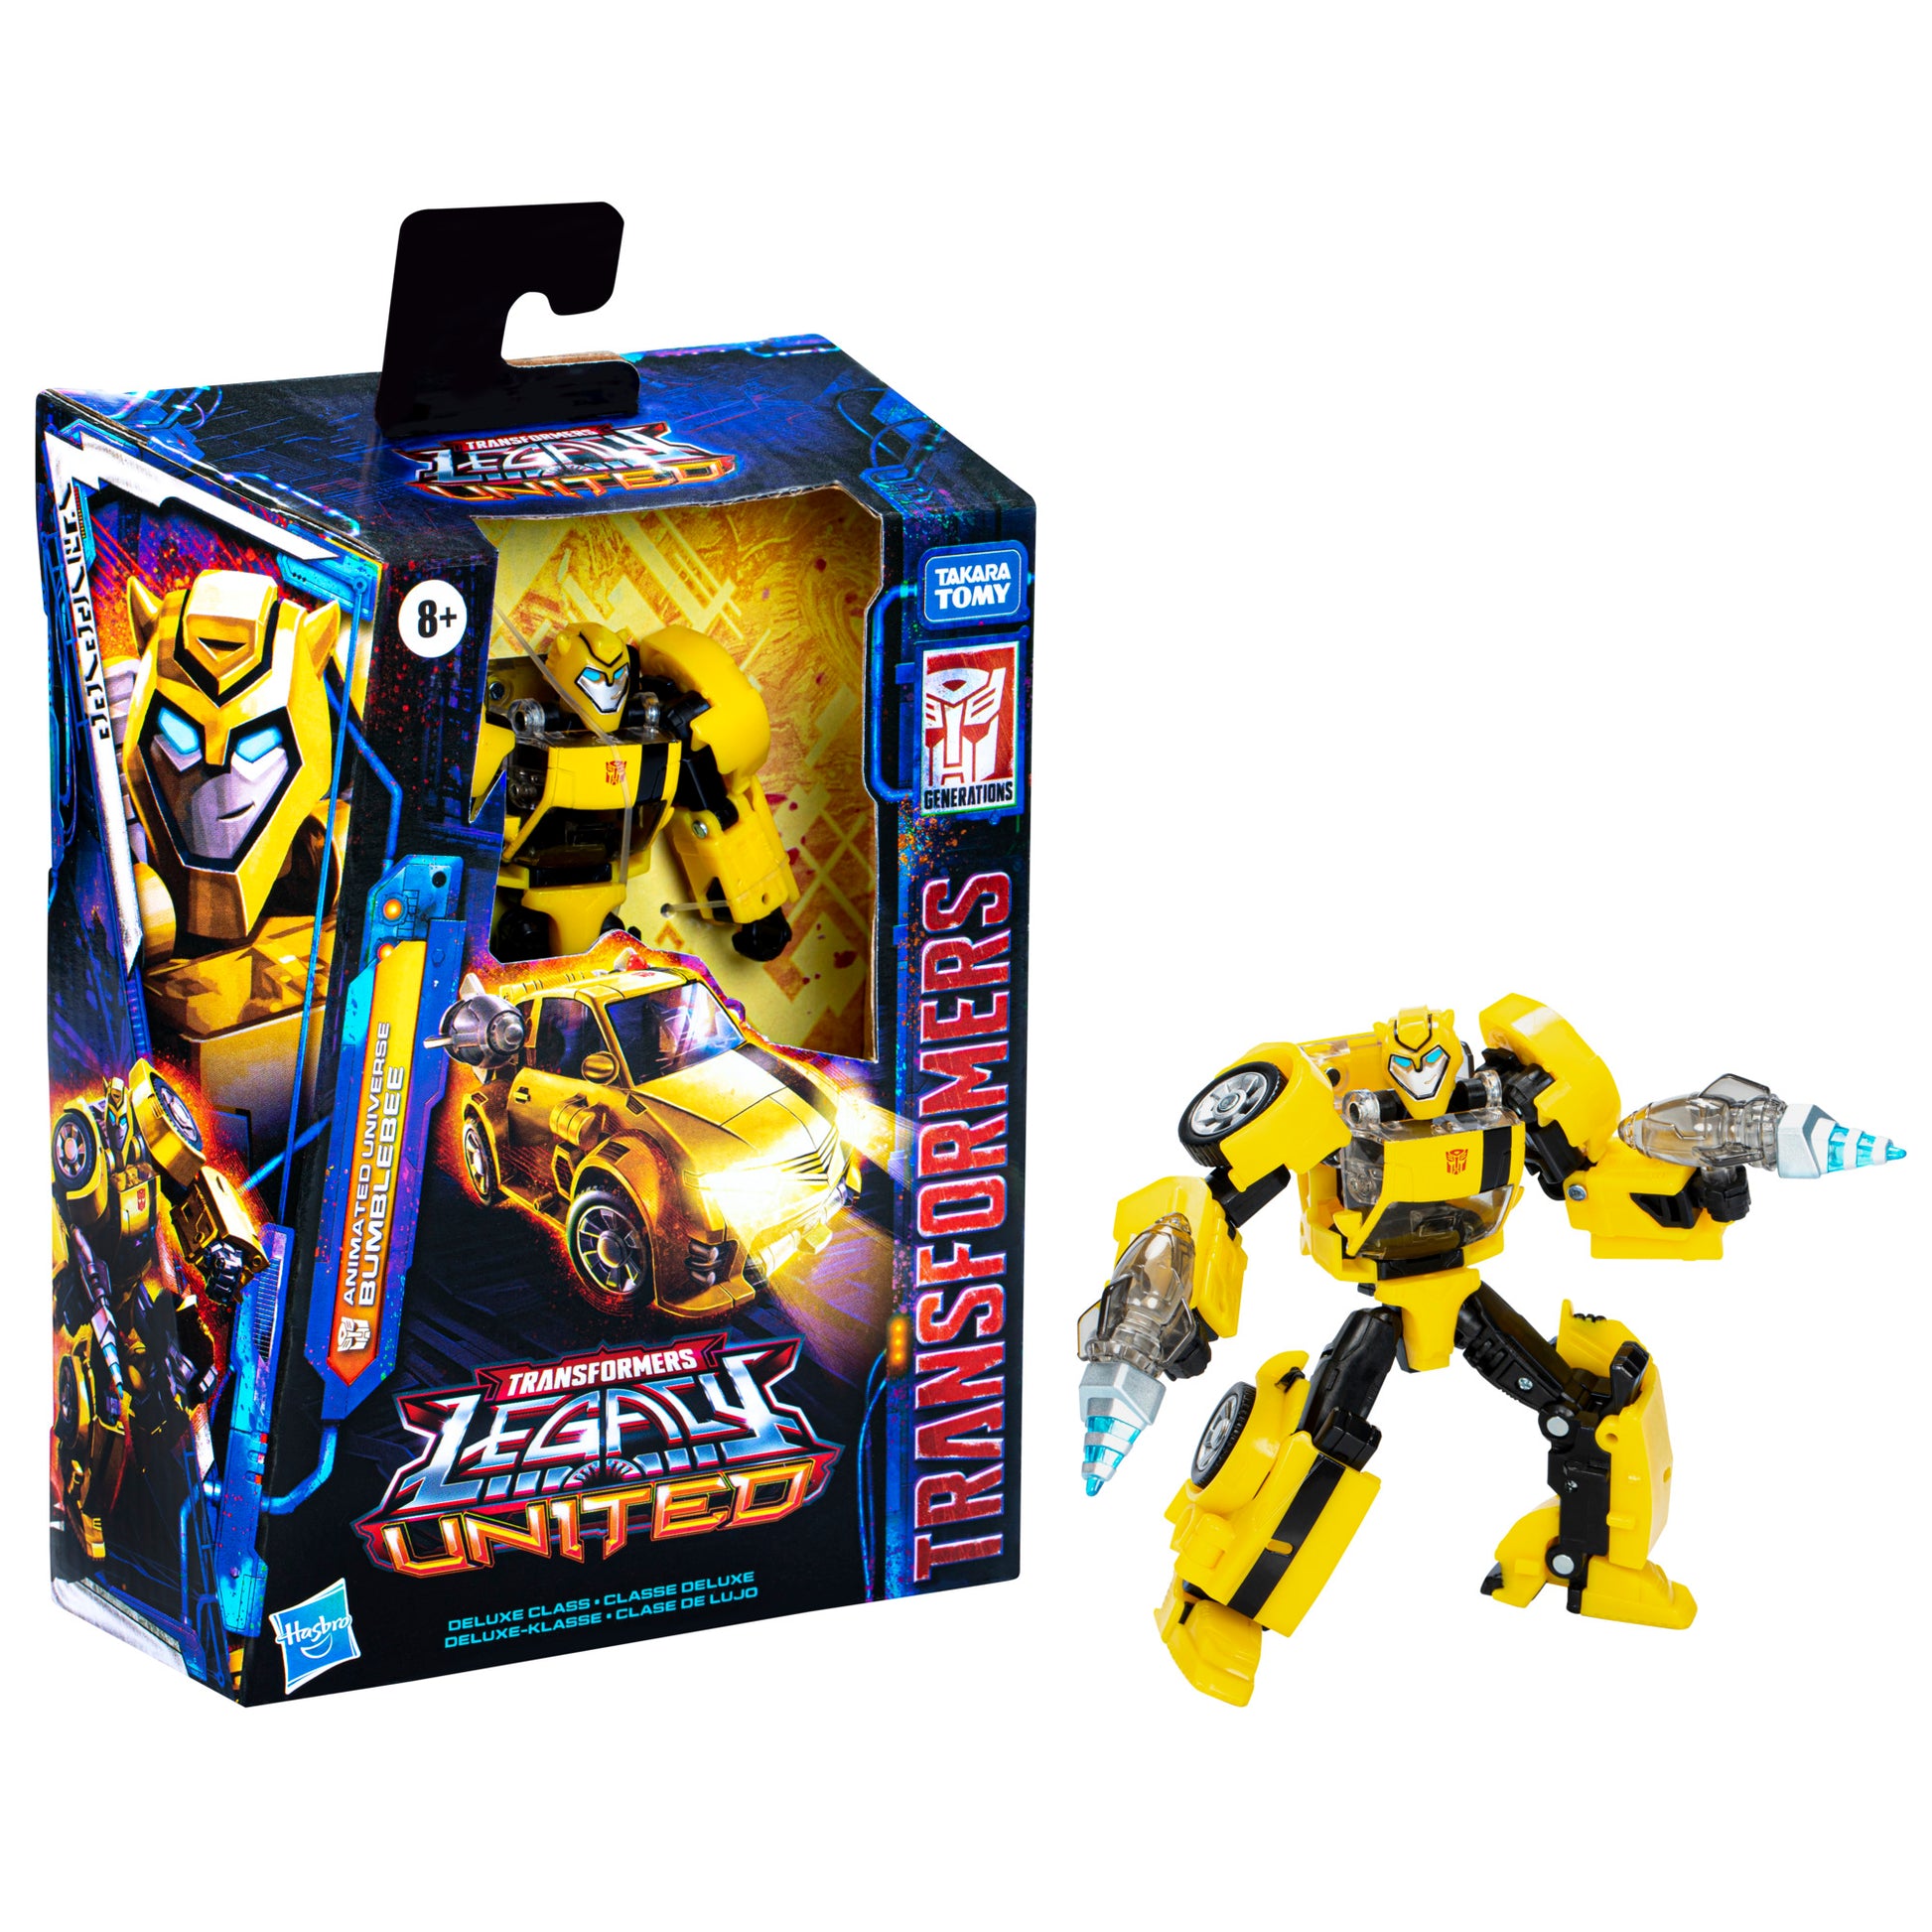 Transformers Legacy United Deluxe Animated Universe Bumblebee 5.5” Action Figure, 8+ heretoserveyou